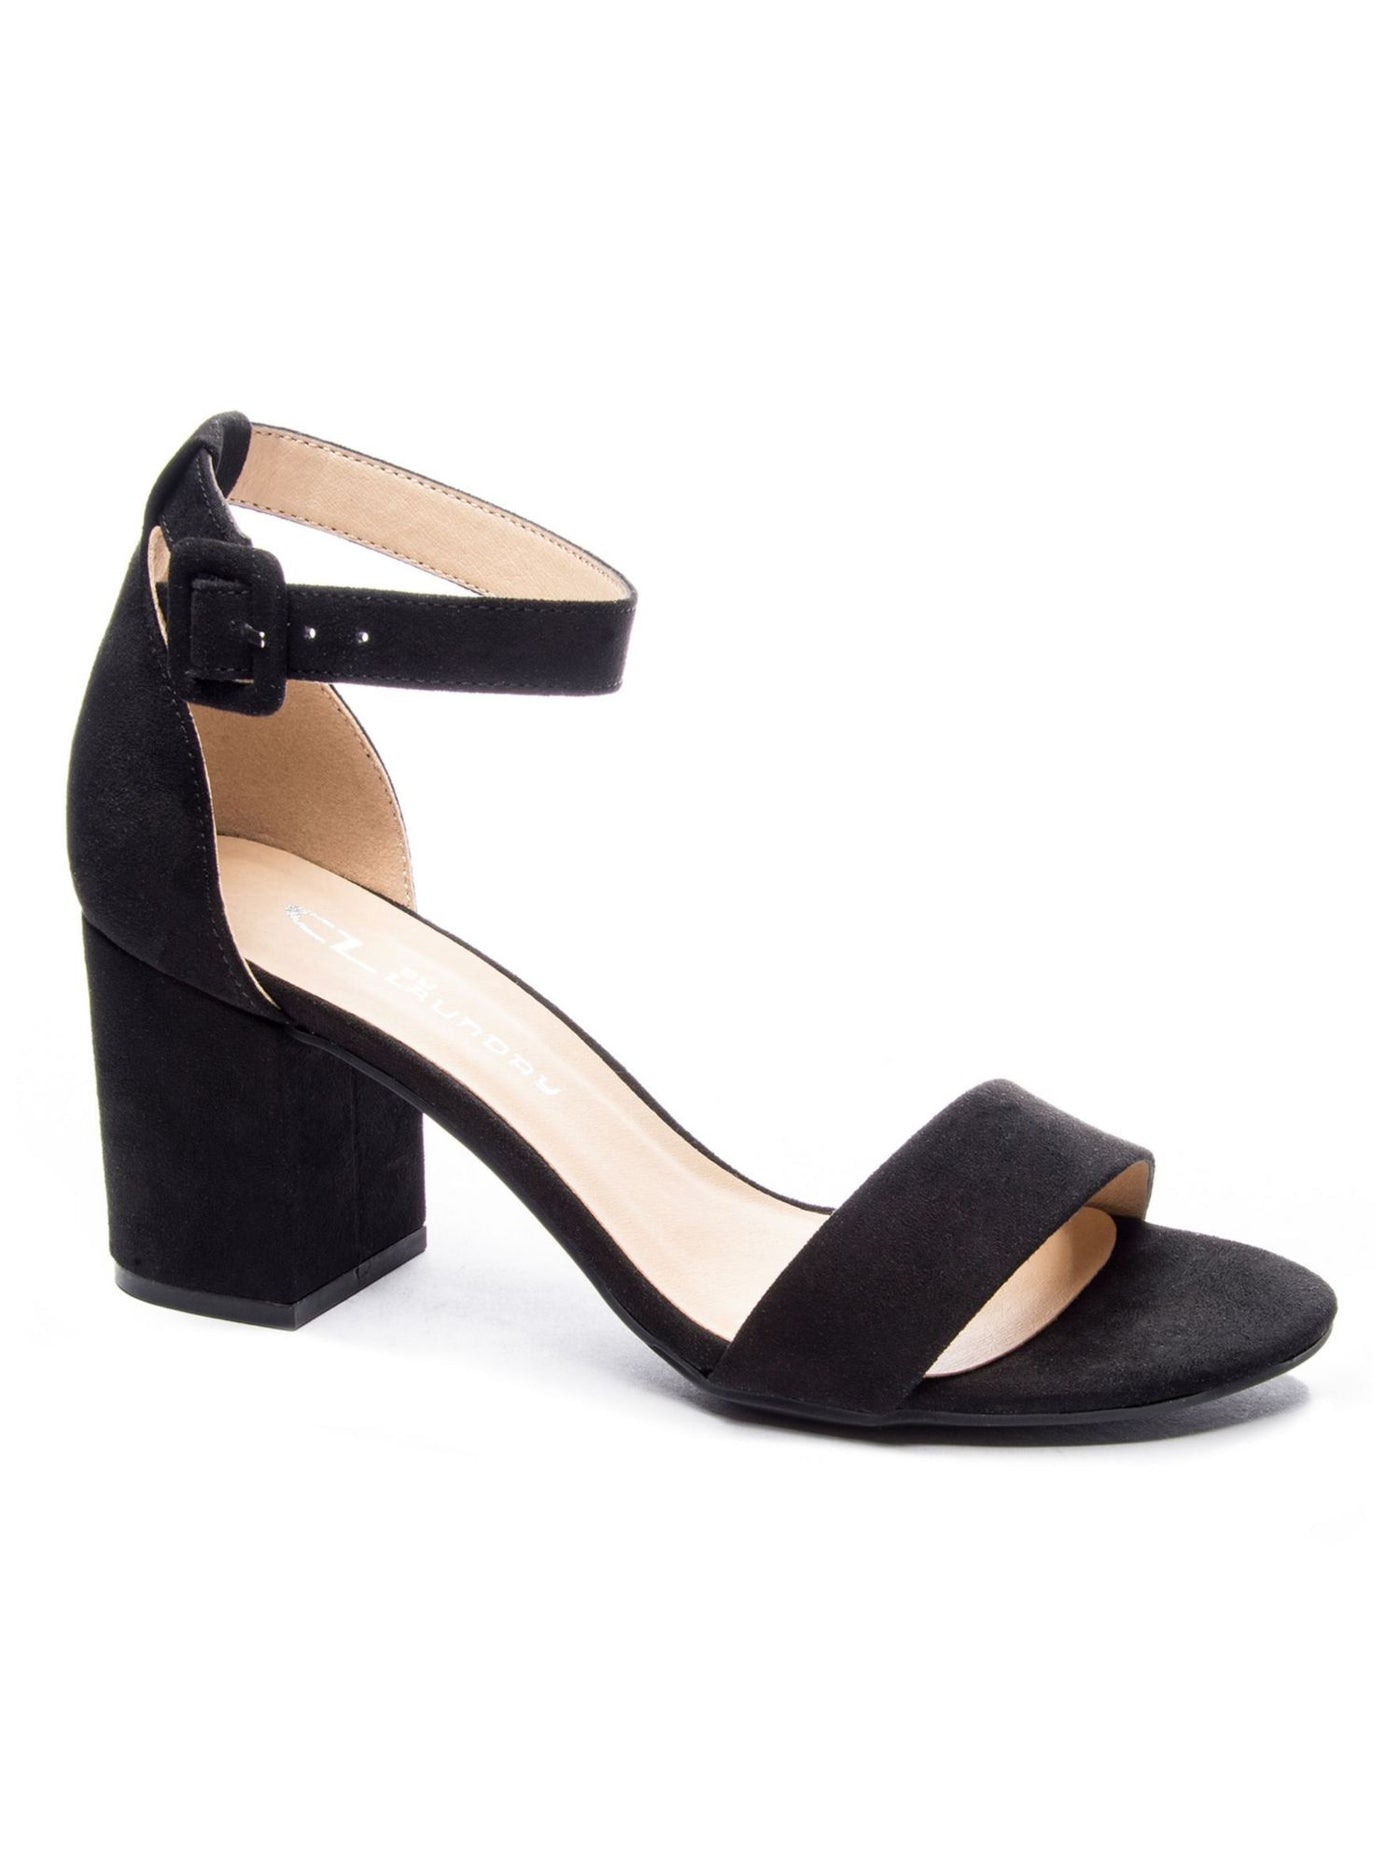 CL BY LAUNDRY Womens Black Ankle Strap Padded Jody Round Toe Block Heel Buckle Heeled Sandal 6.5 M